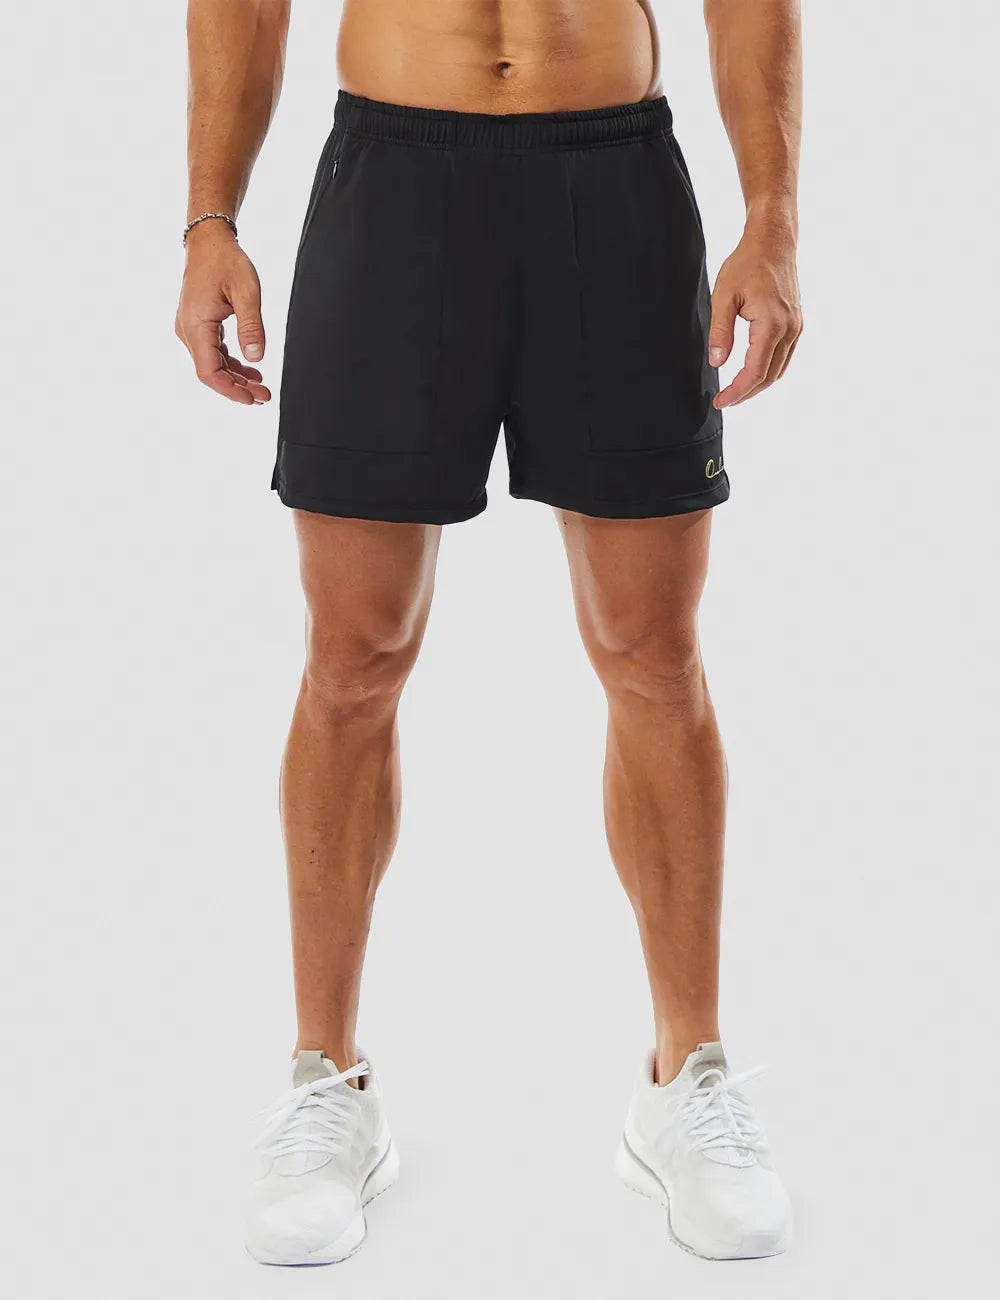 Solid Gym Shorts 5" - Olive Green